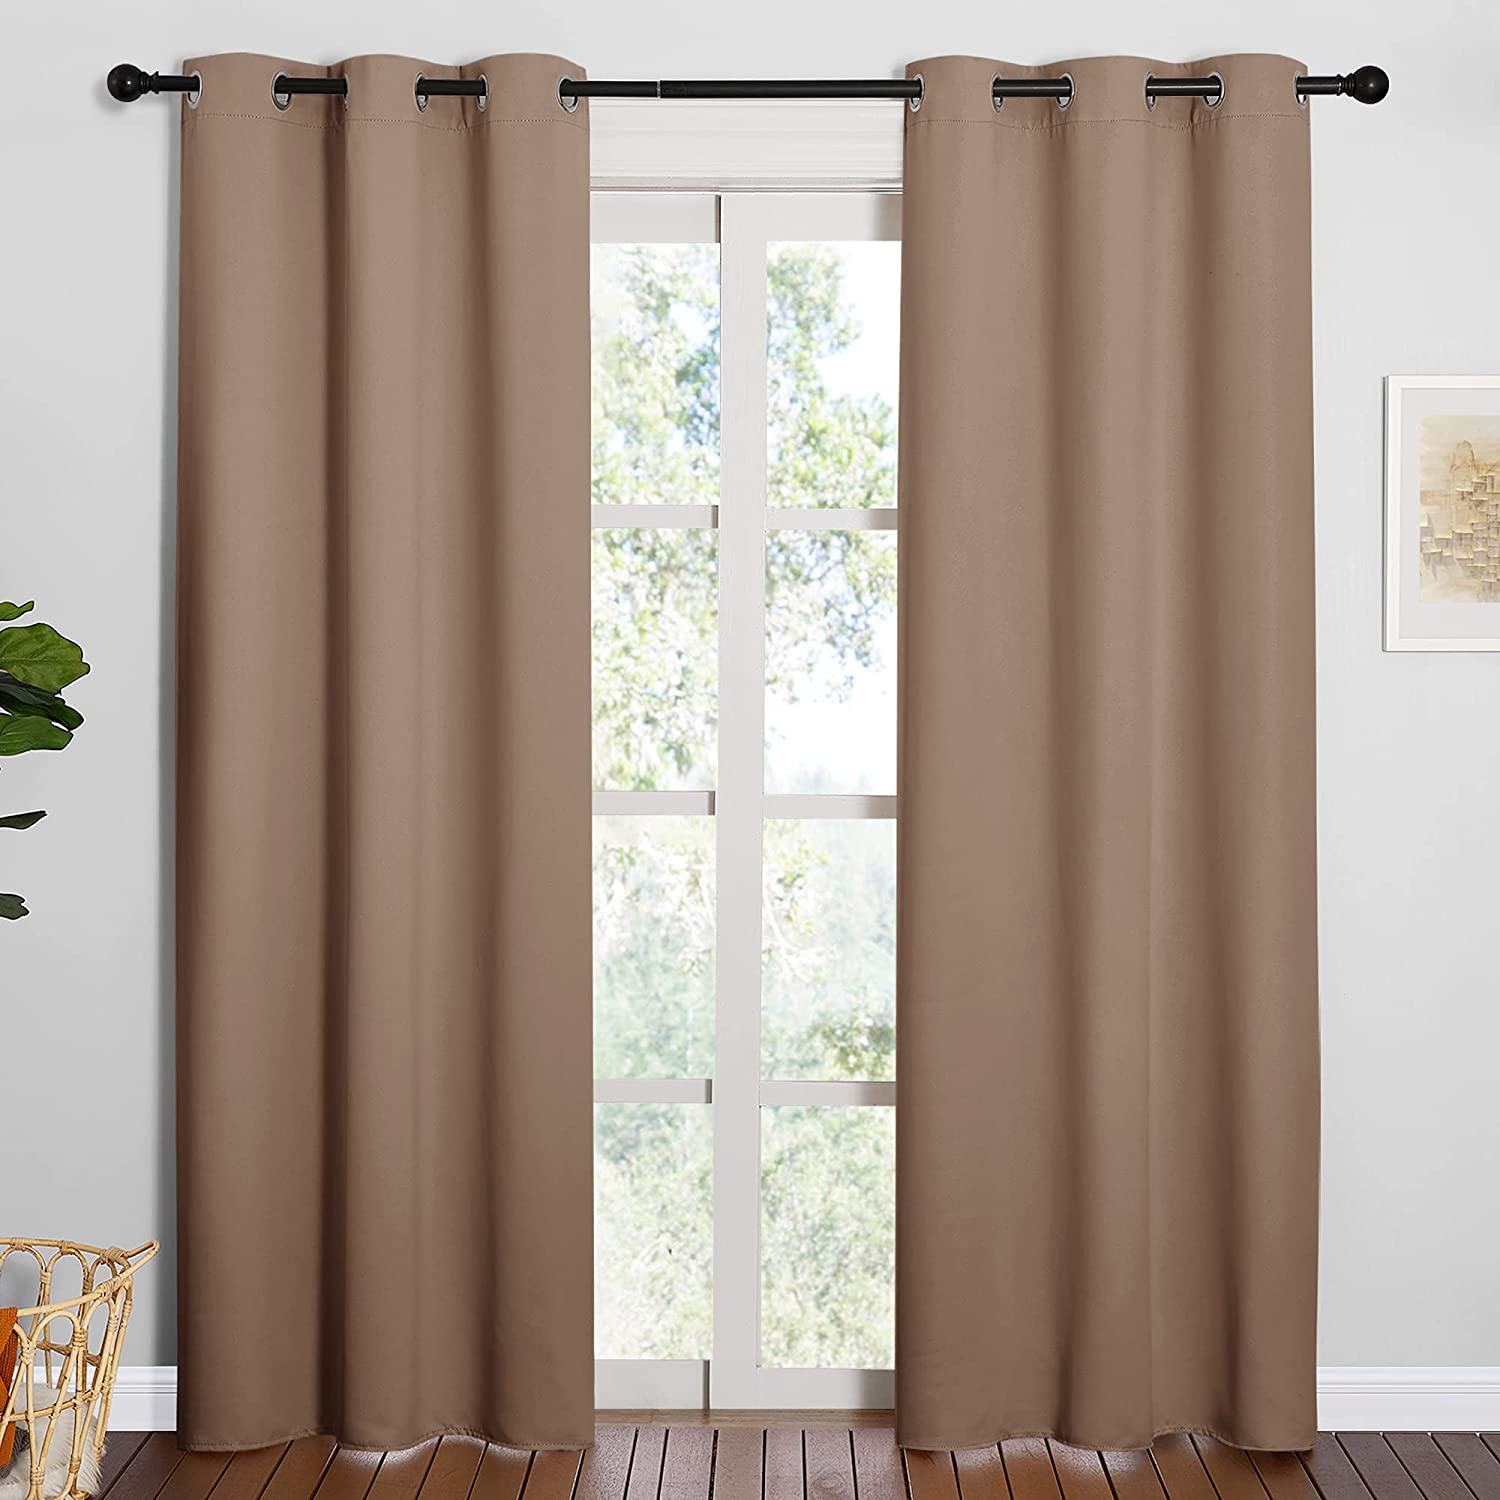 Grommet Blackout Curtains Thermal Insulated Drapes for Living Room / Bedroom(Width: 42/52 Inch) 2 Panels KGORGE Store